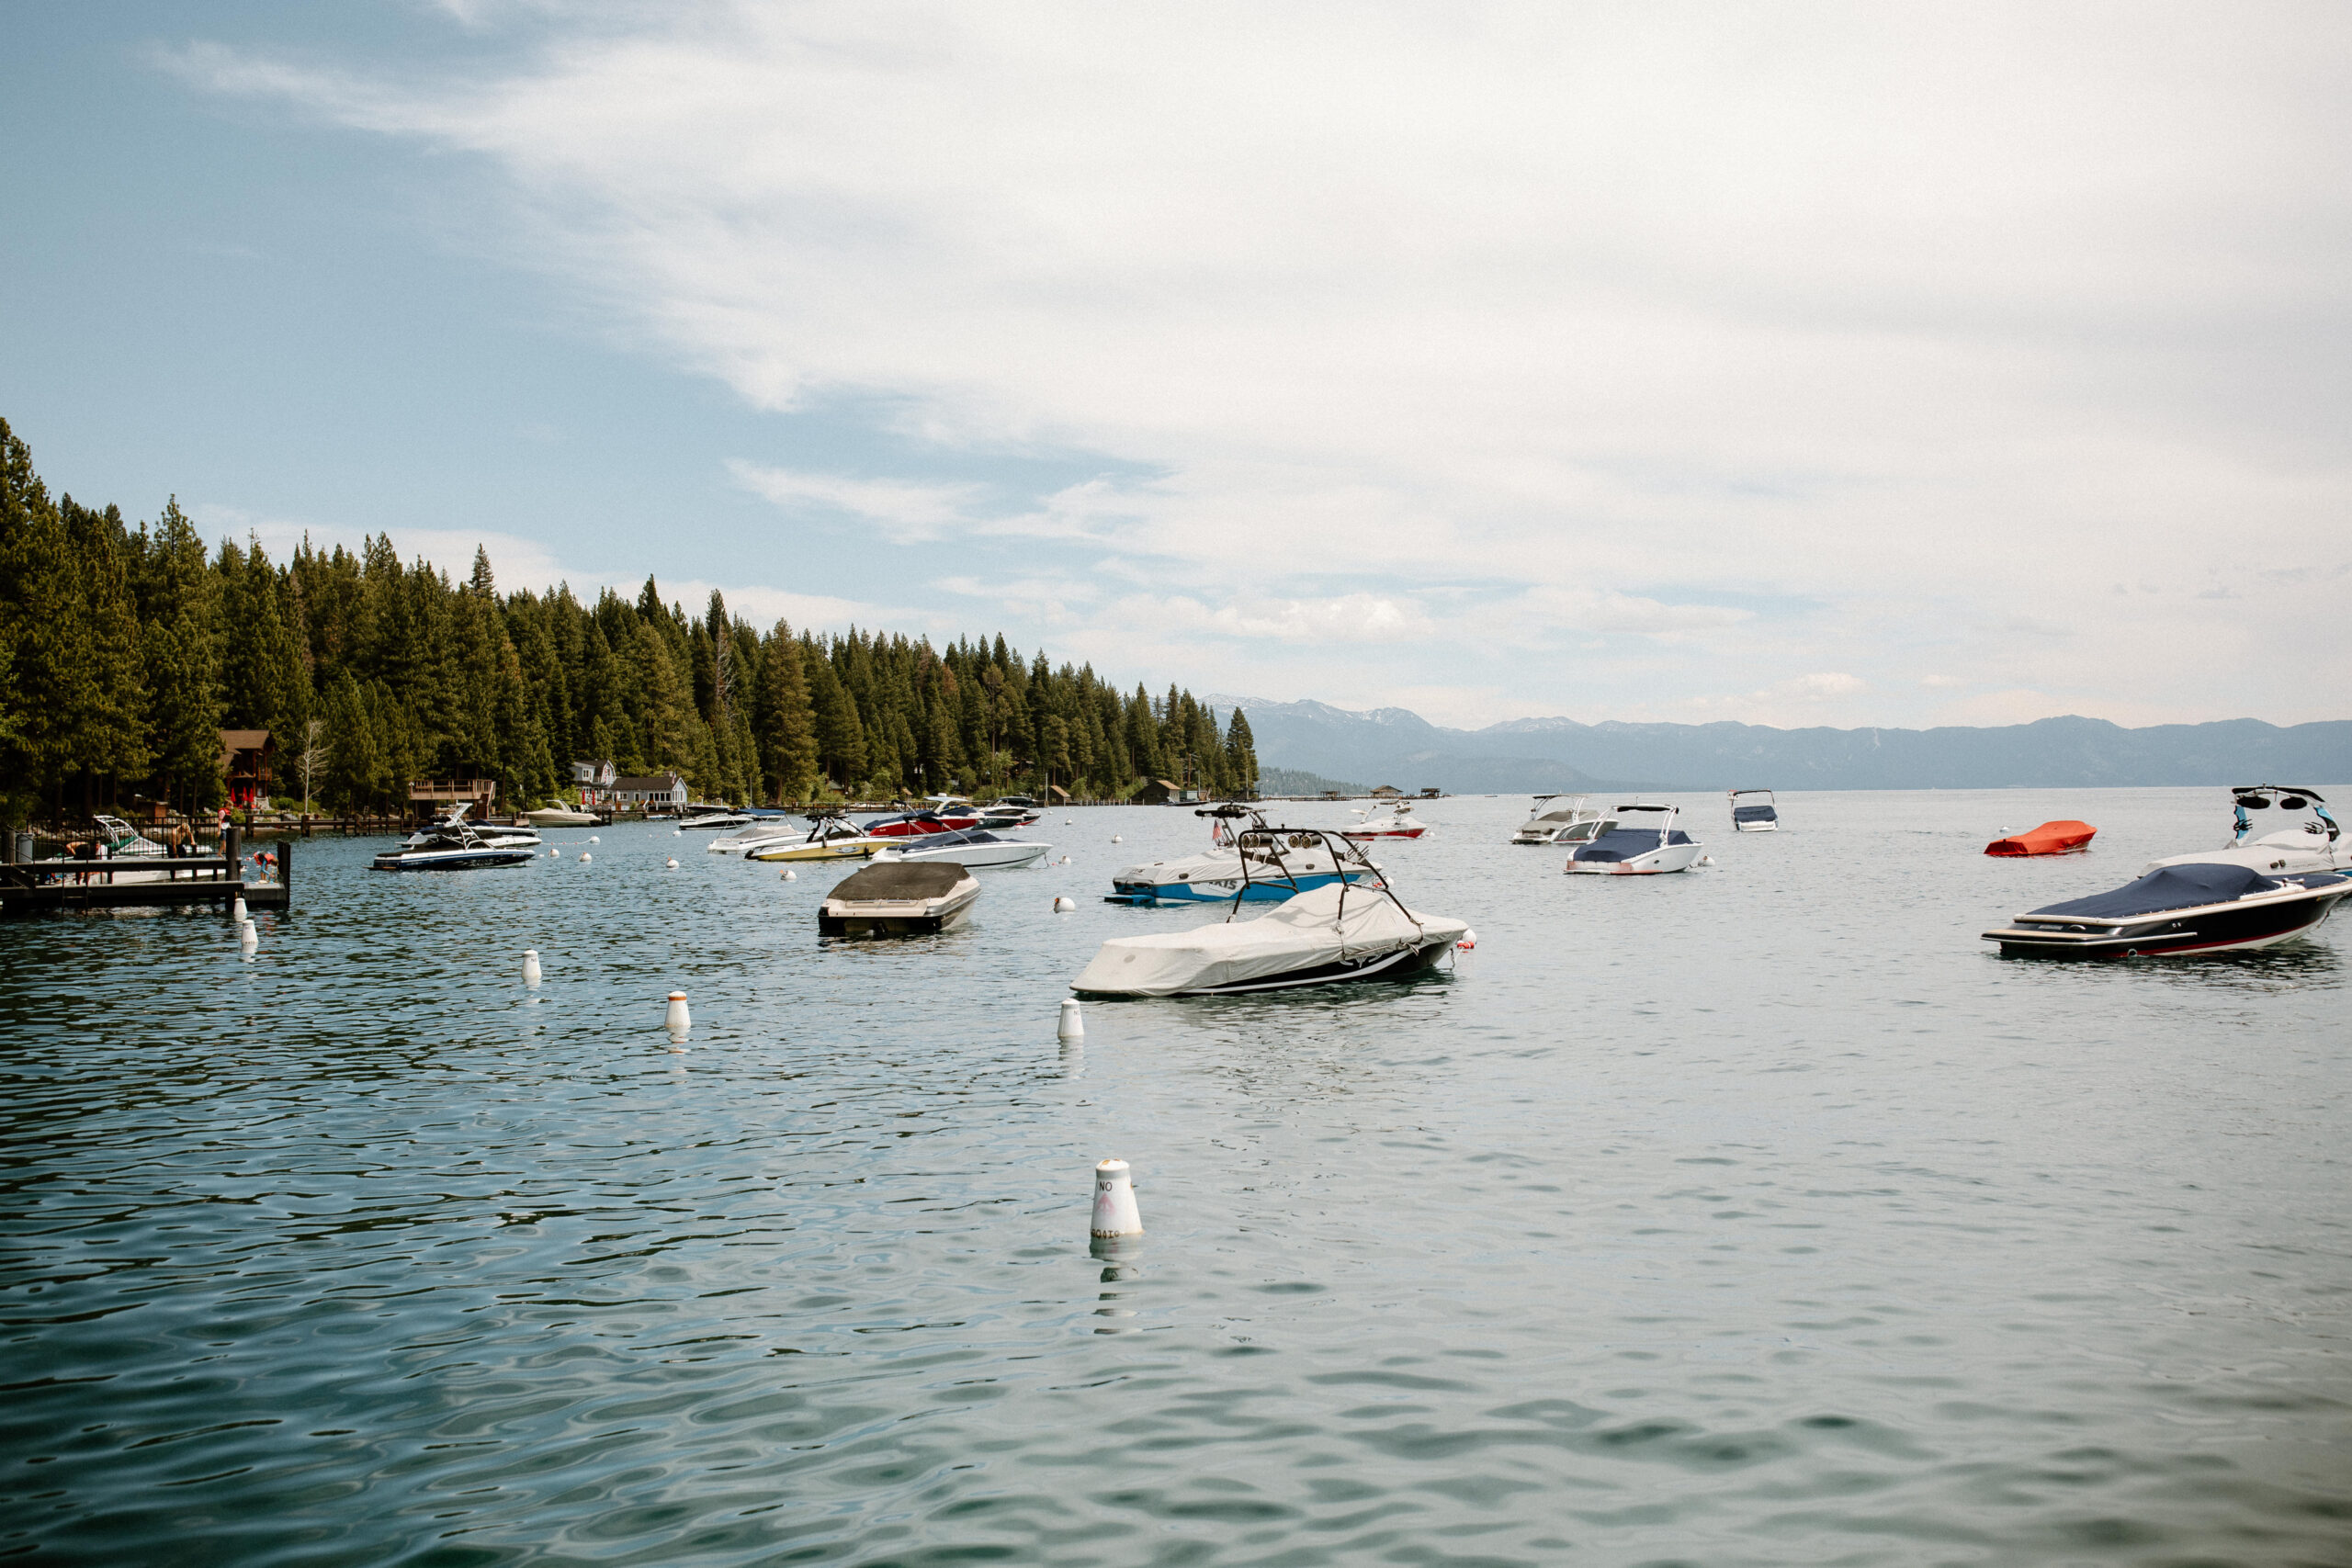 stunning lake tahoe views with boats dotting the water and the mountains in the background